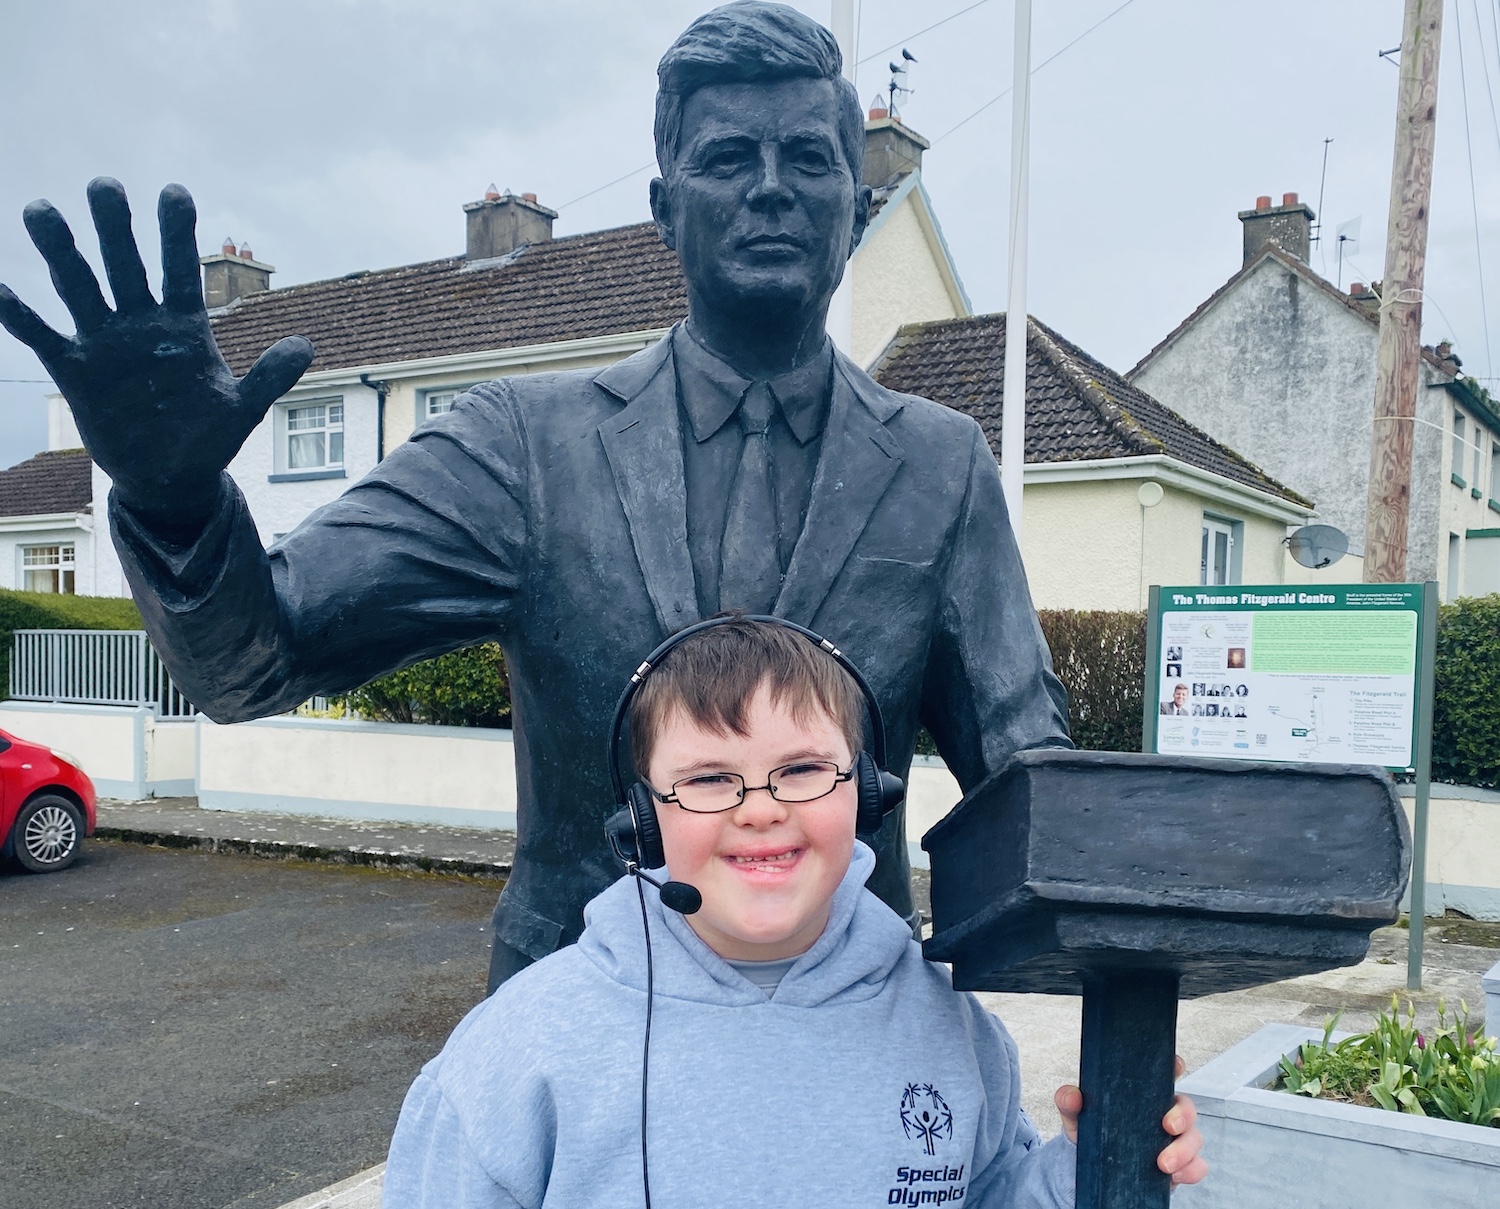 Paudcast - With his 60-second Monday Motivation Paudcast, young Pádraig O'Callaghan of Knockainey, Co. Limerick, is promoting positivity around the world.